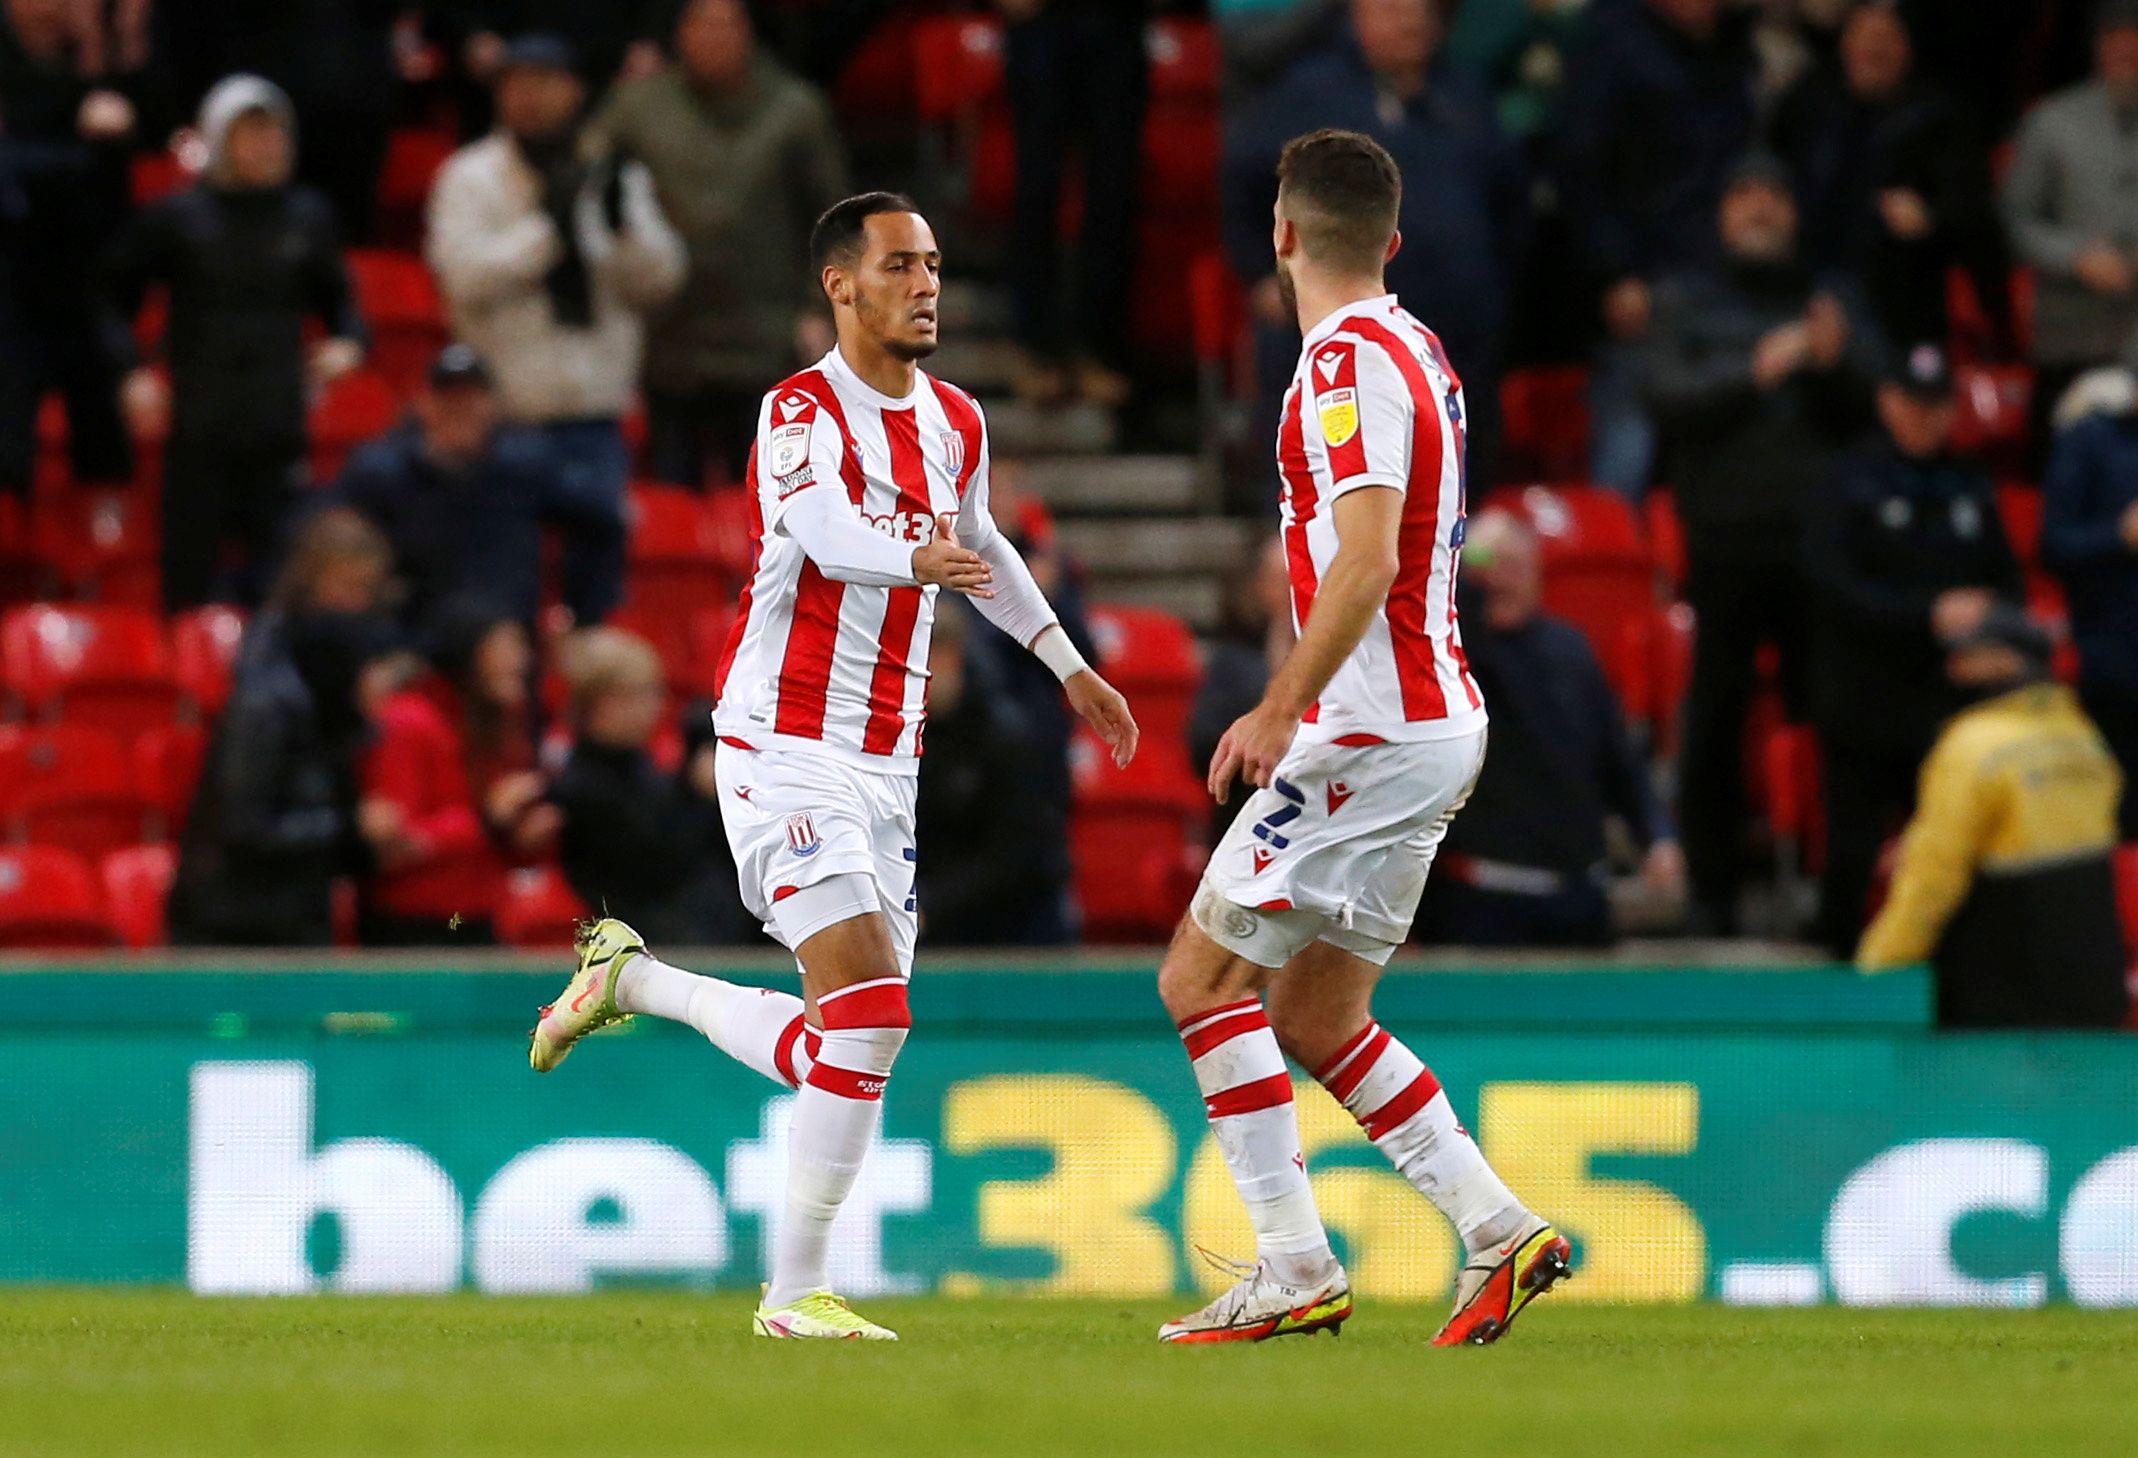 Soccer Football - Championship - Stoke City v Derby County - bet365 Stadium, Stoke-On-Trent, Britain - December 30, 2021  Stoke City's Tom Ince celebrates scoring their first goal  Action Images/Ed Sykes  EDITORIAL USE ONLY. No use with unauthorized audio, video, data, fixture lists, club/league logos or 